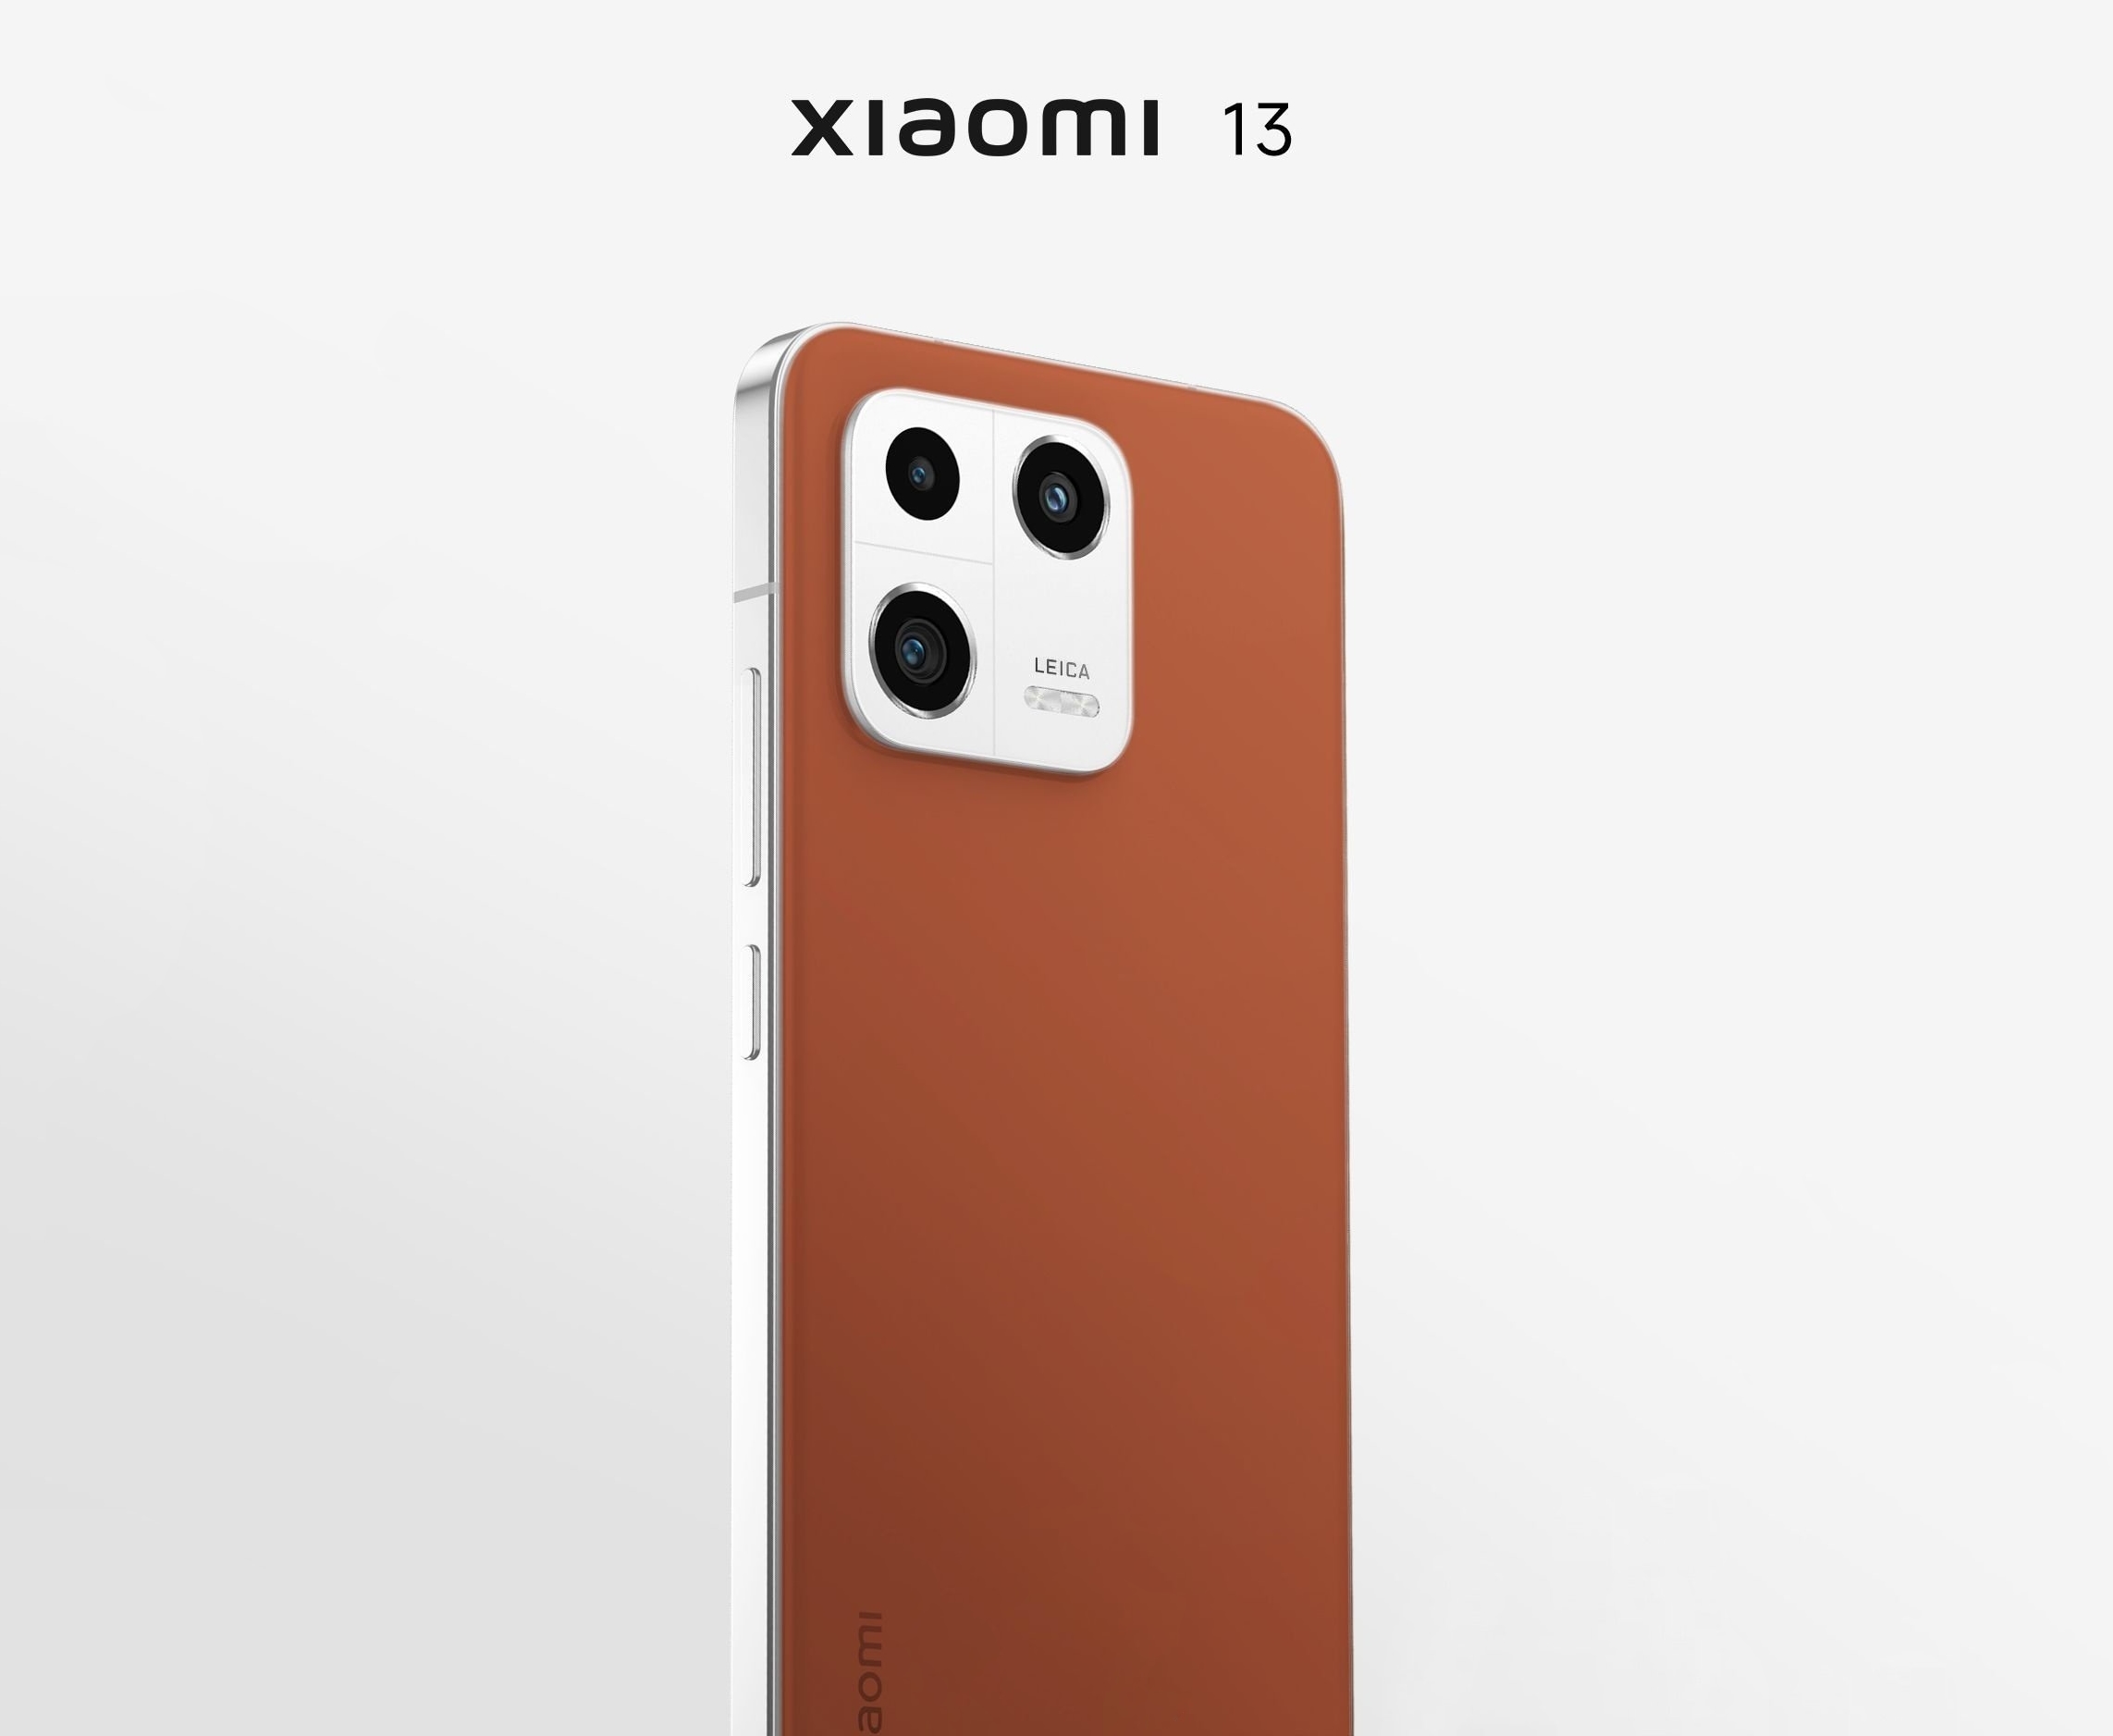 Xiaomi 13 appeared on the quality rendering: a smartphone with a triple Leica camera and a leather back panel